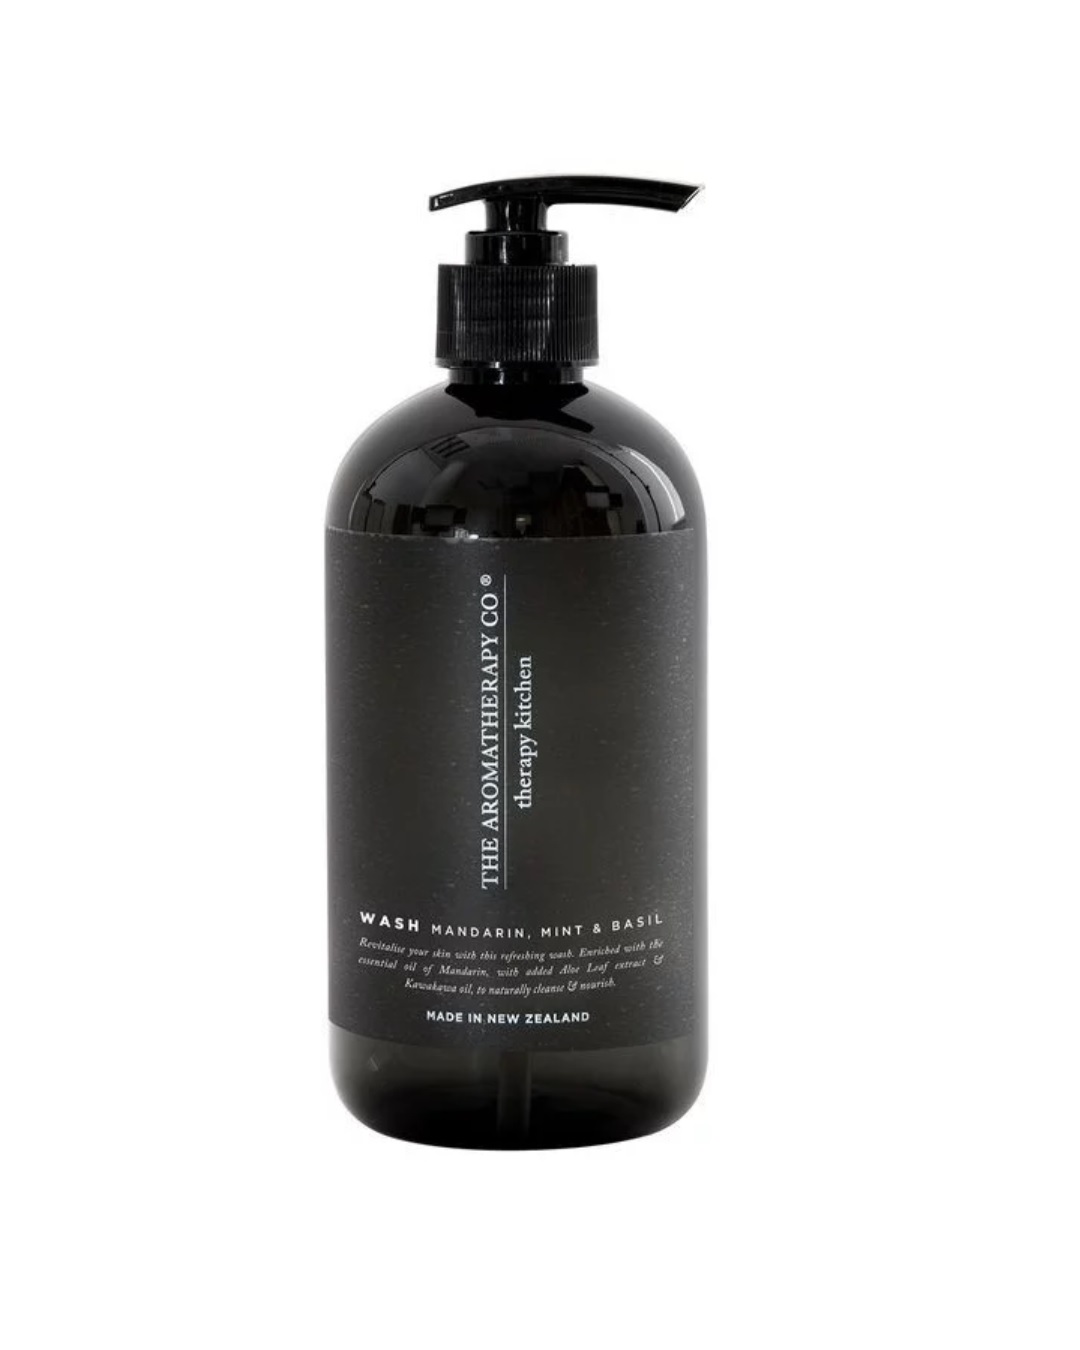 Therapy kitchen hand wash in mandarin mint and basil